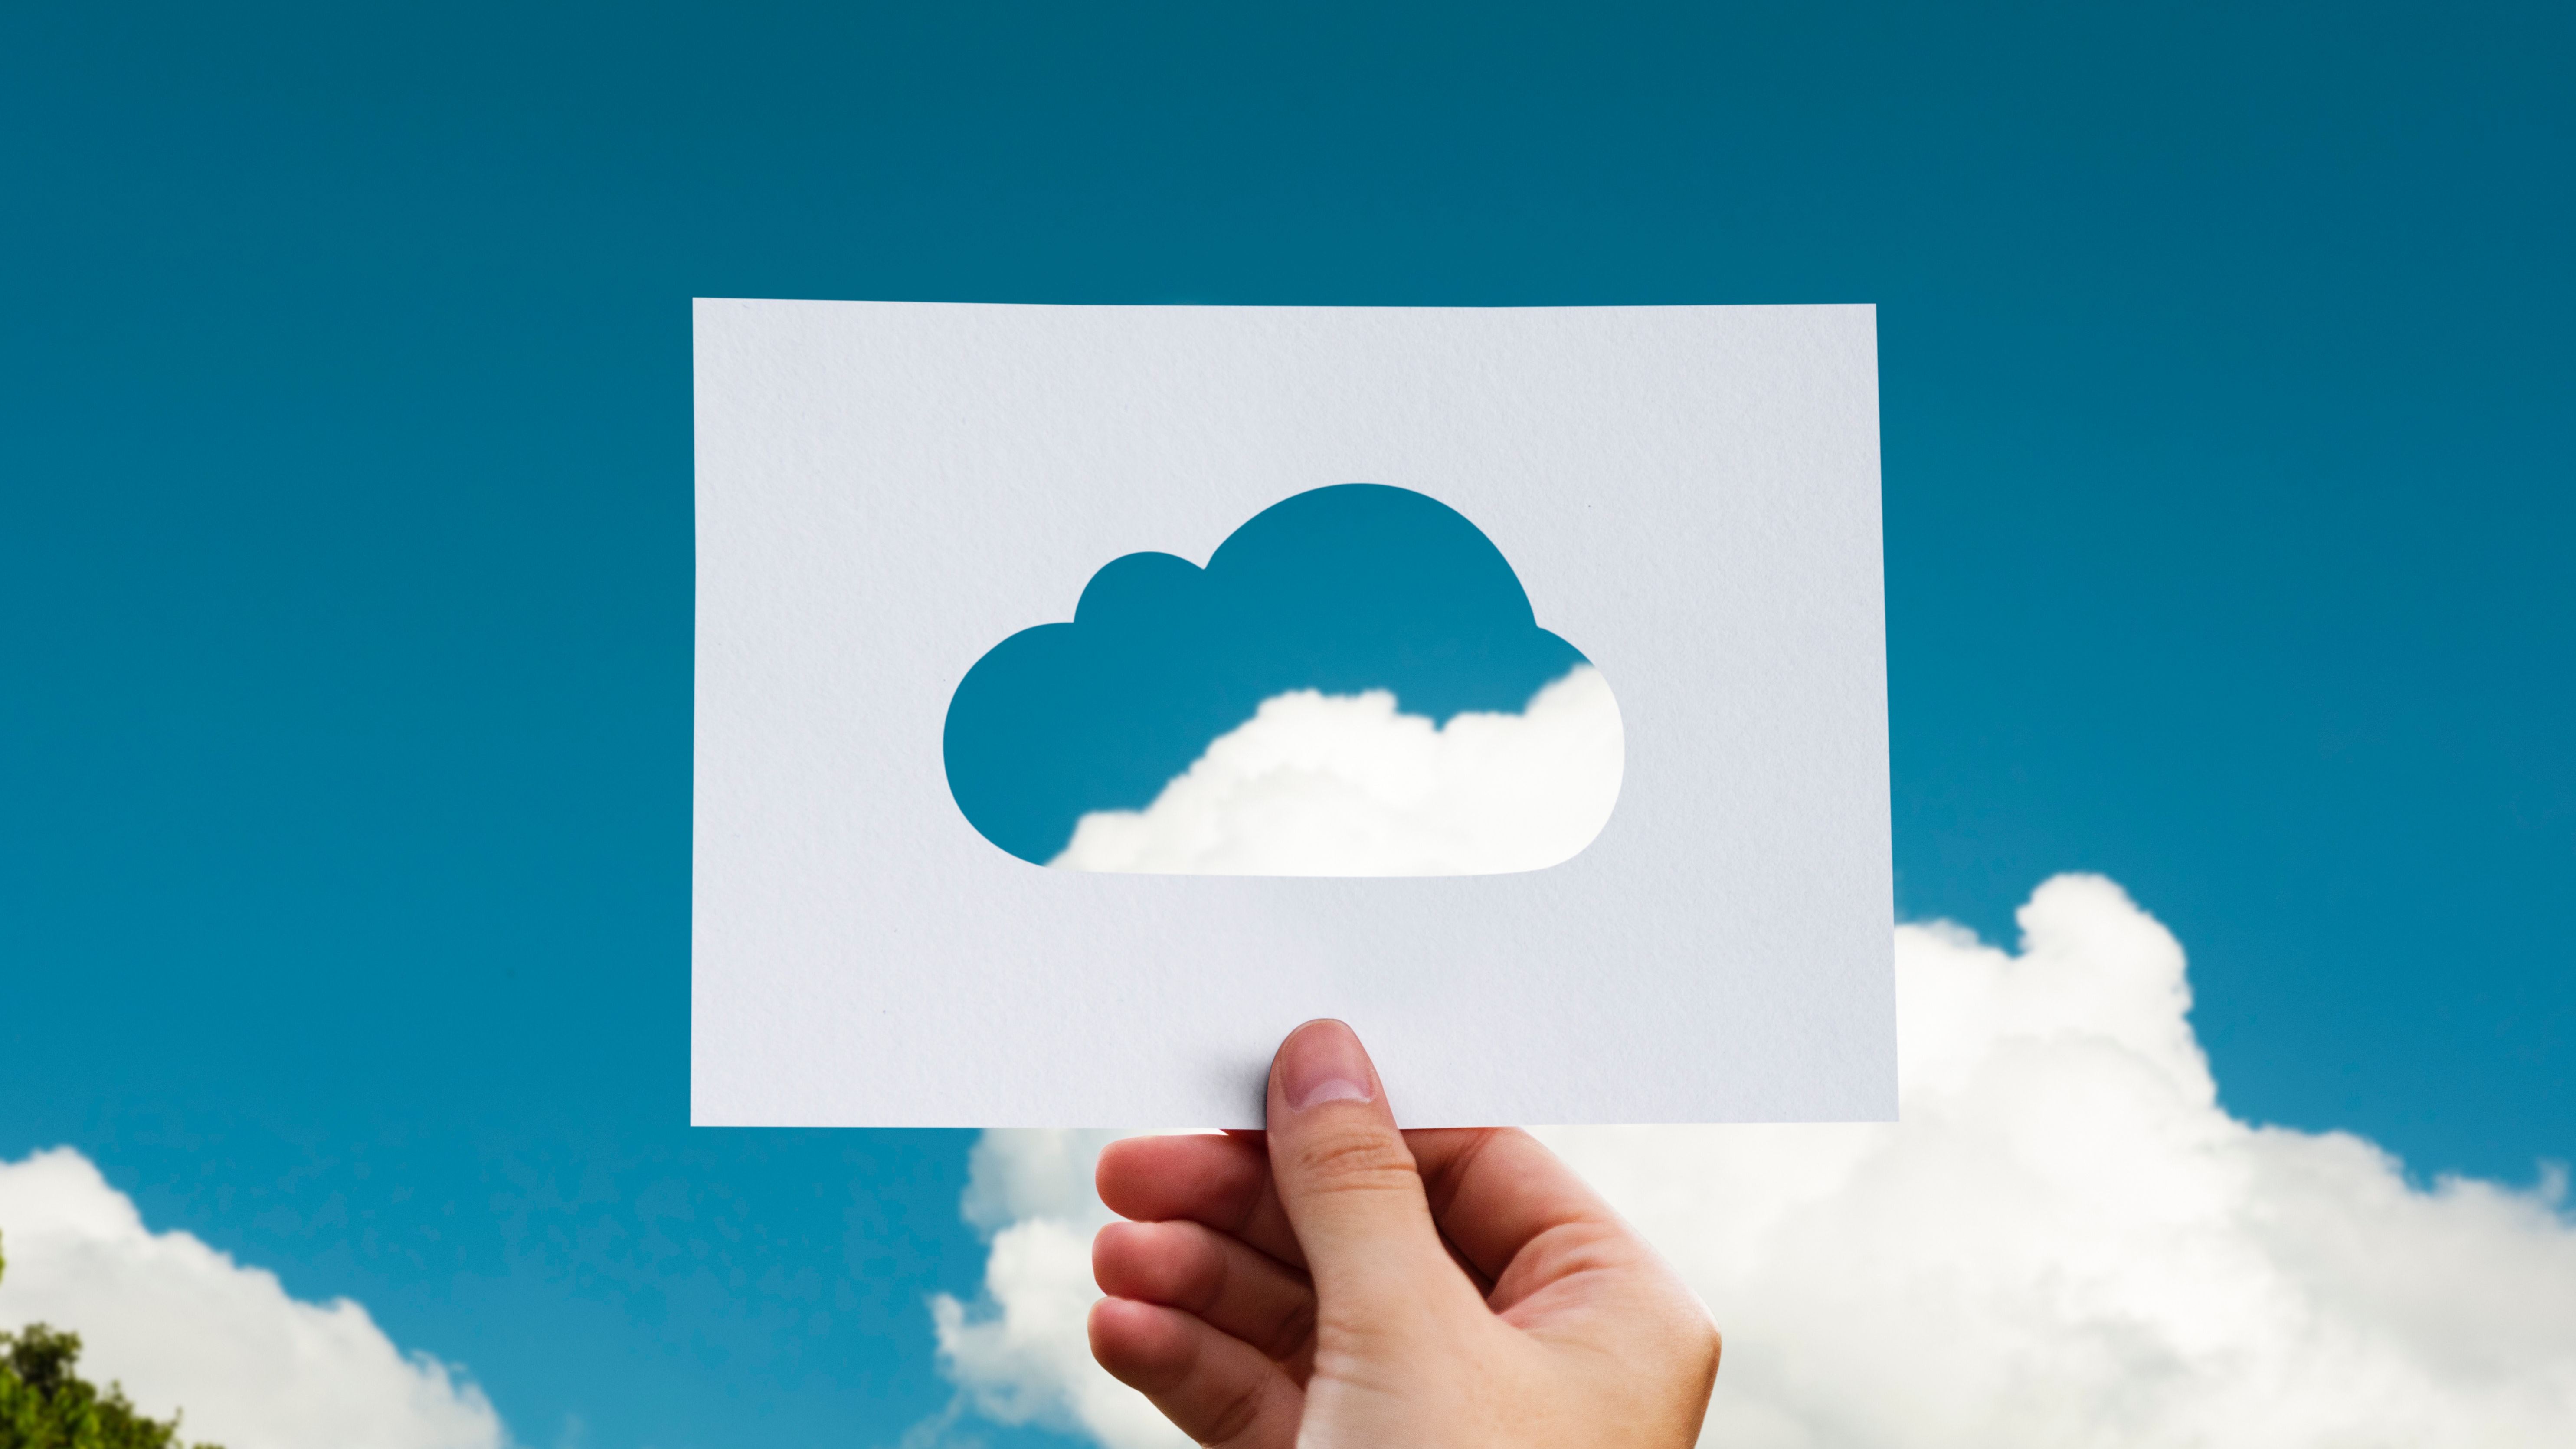 An R&D tax credit advisor holding a cut out image of a cloud against a blue sky